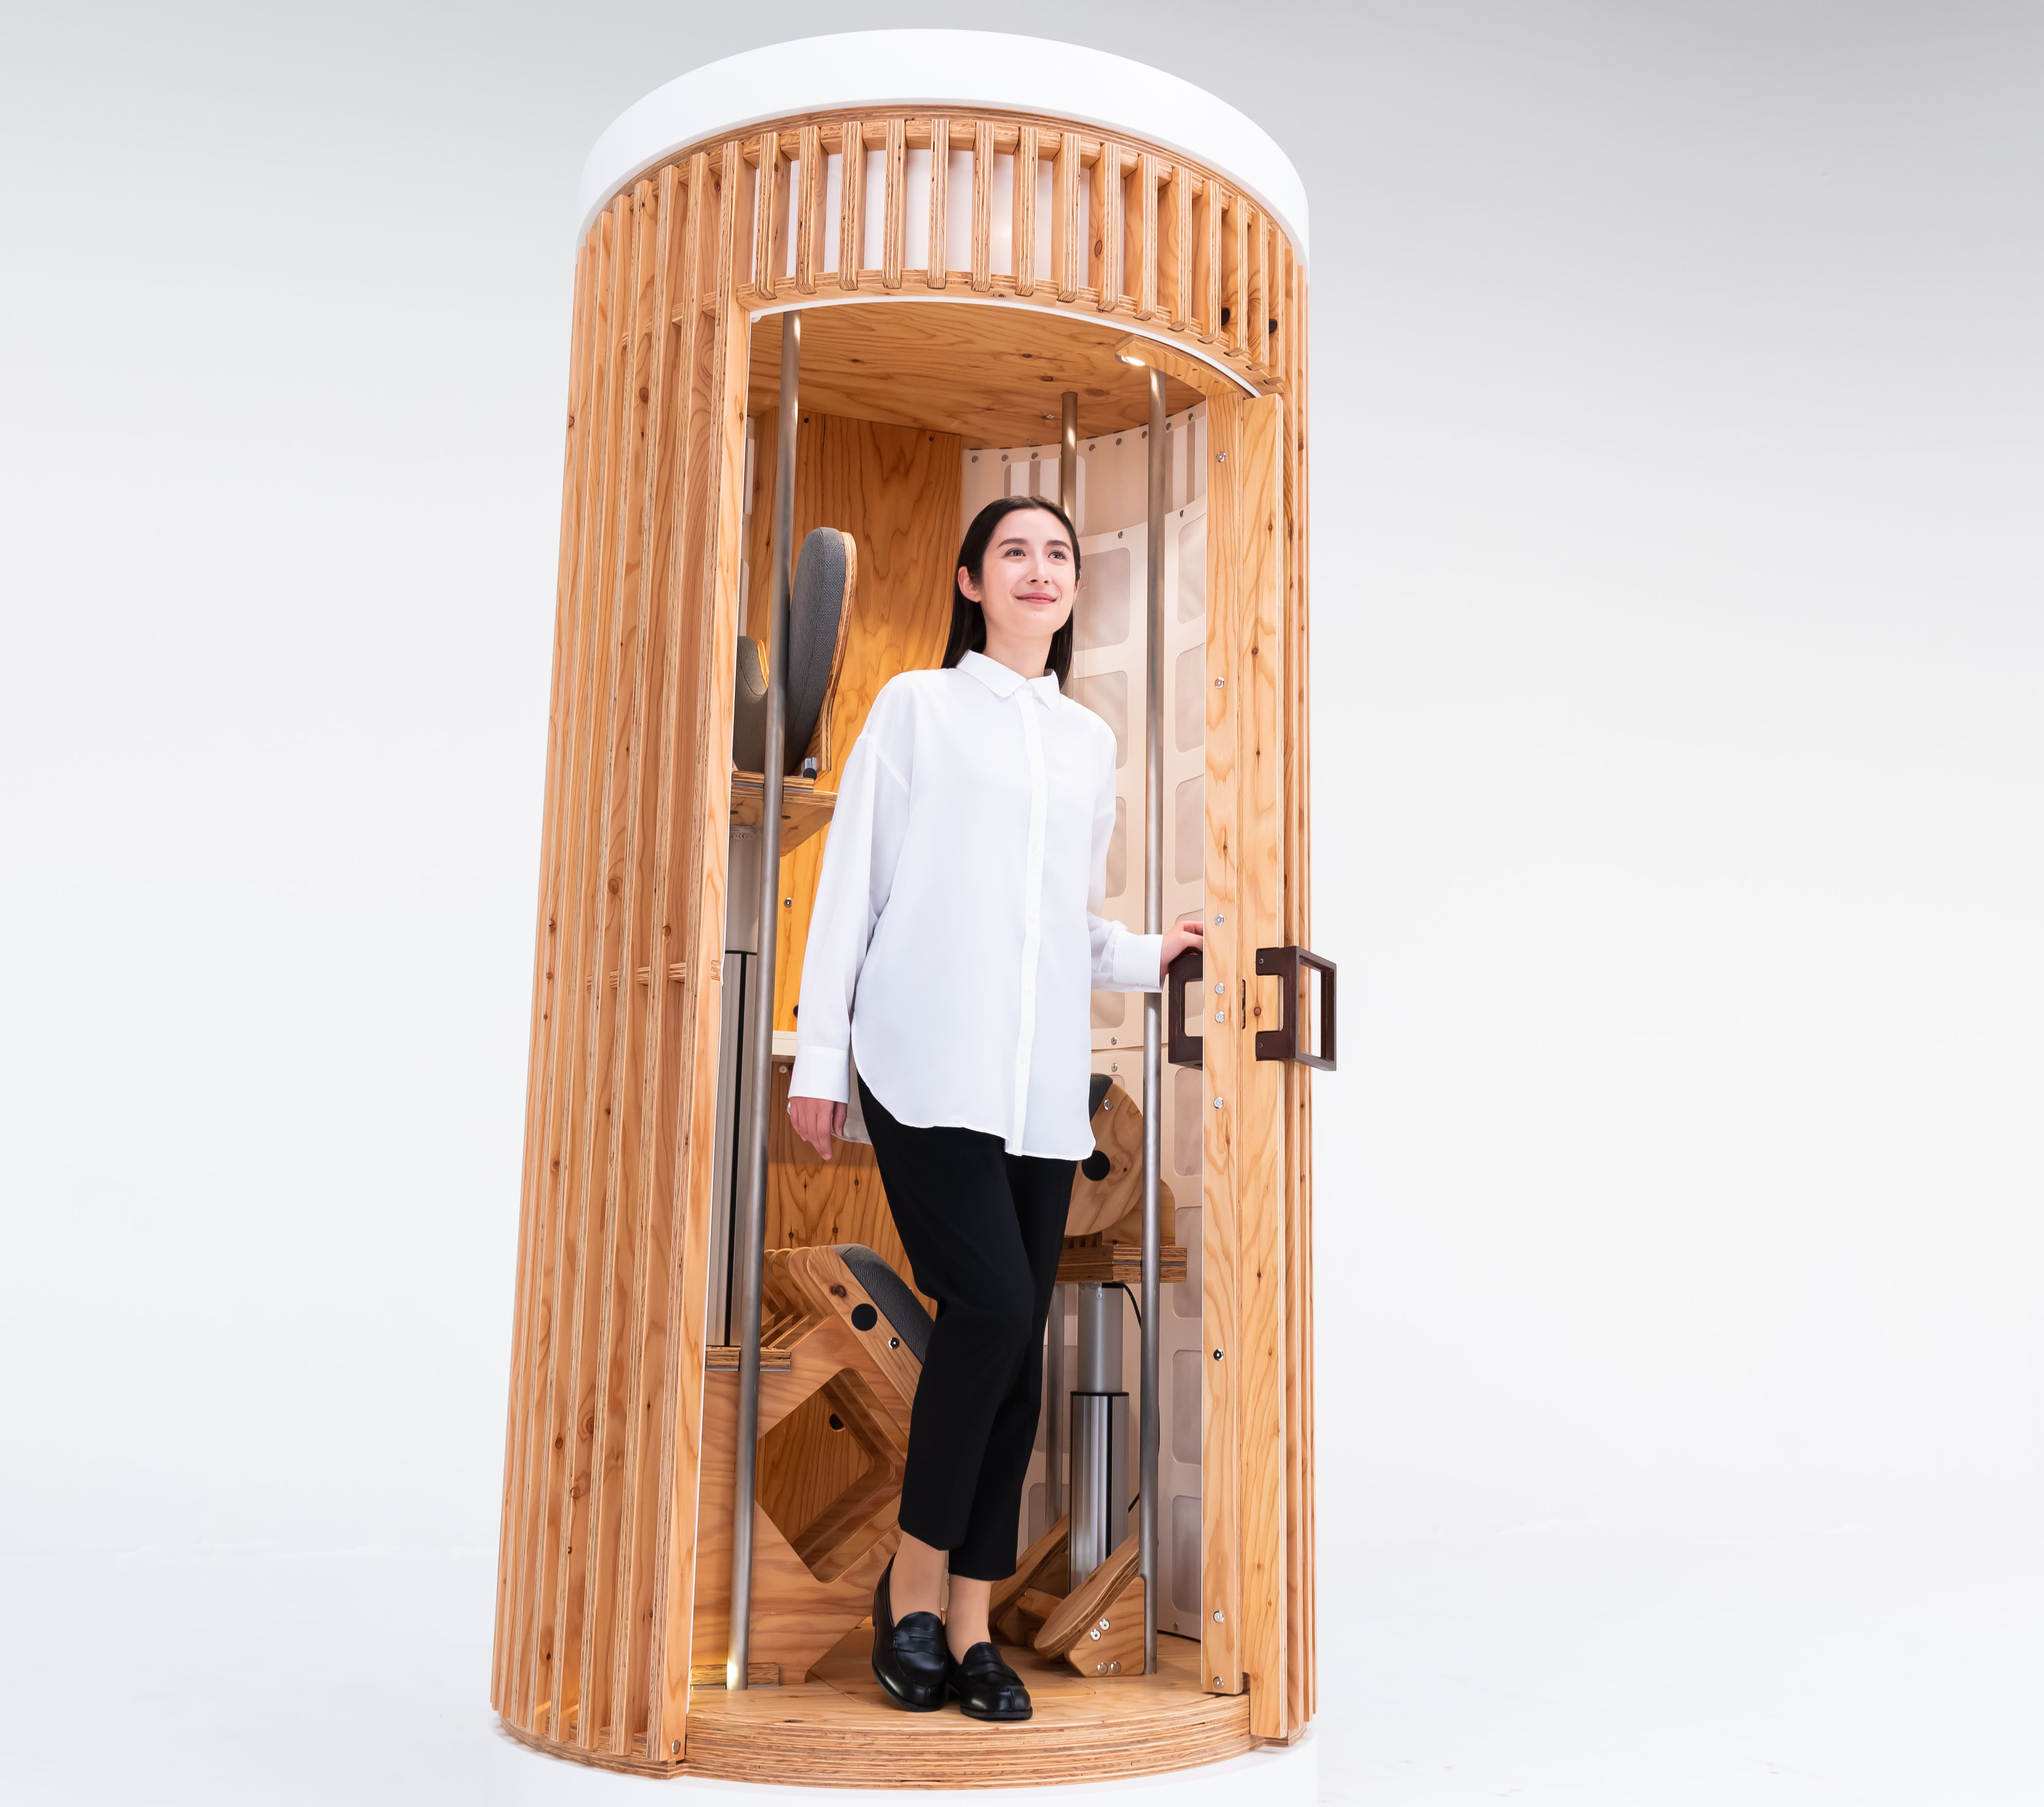 GiraffeNap Offers Unique Nap Box That Allows You To Sleep While Standing